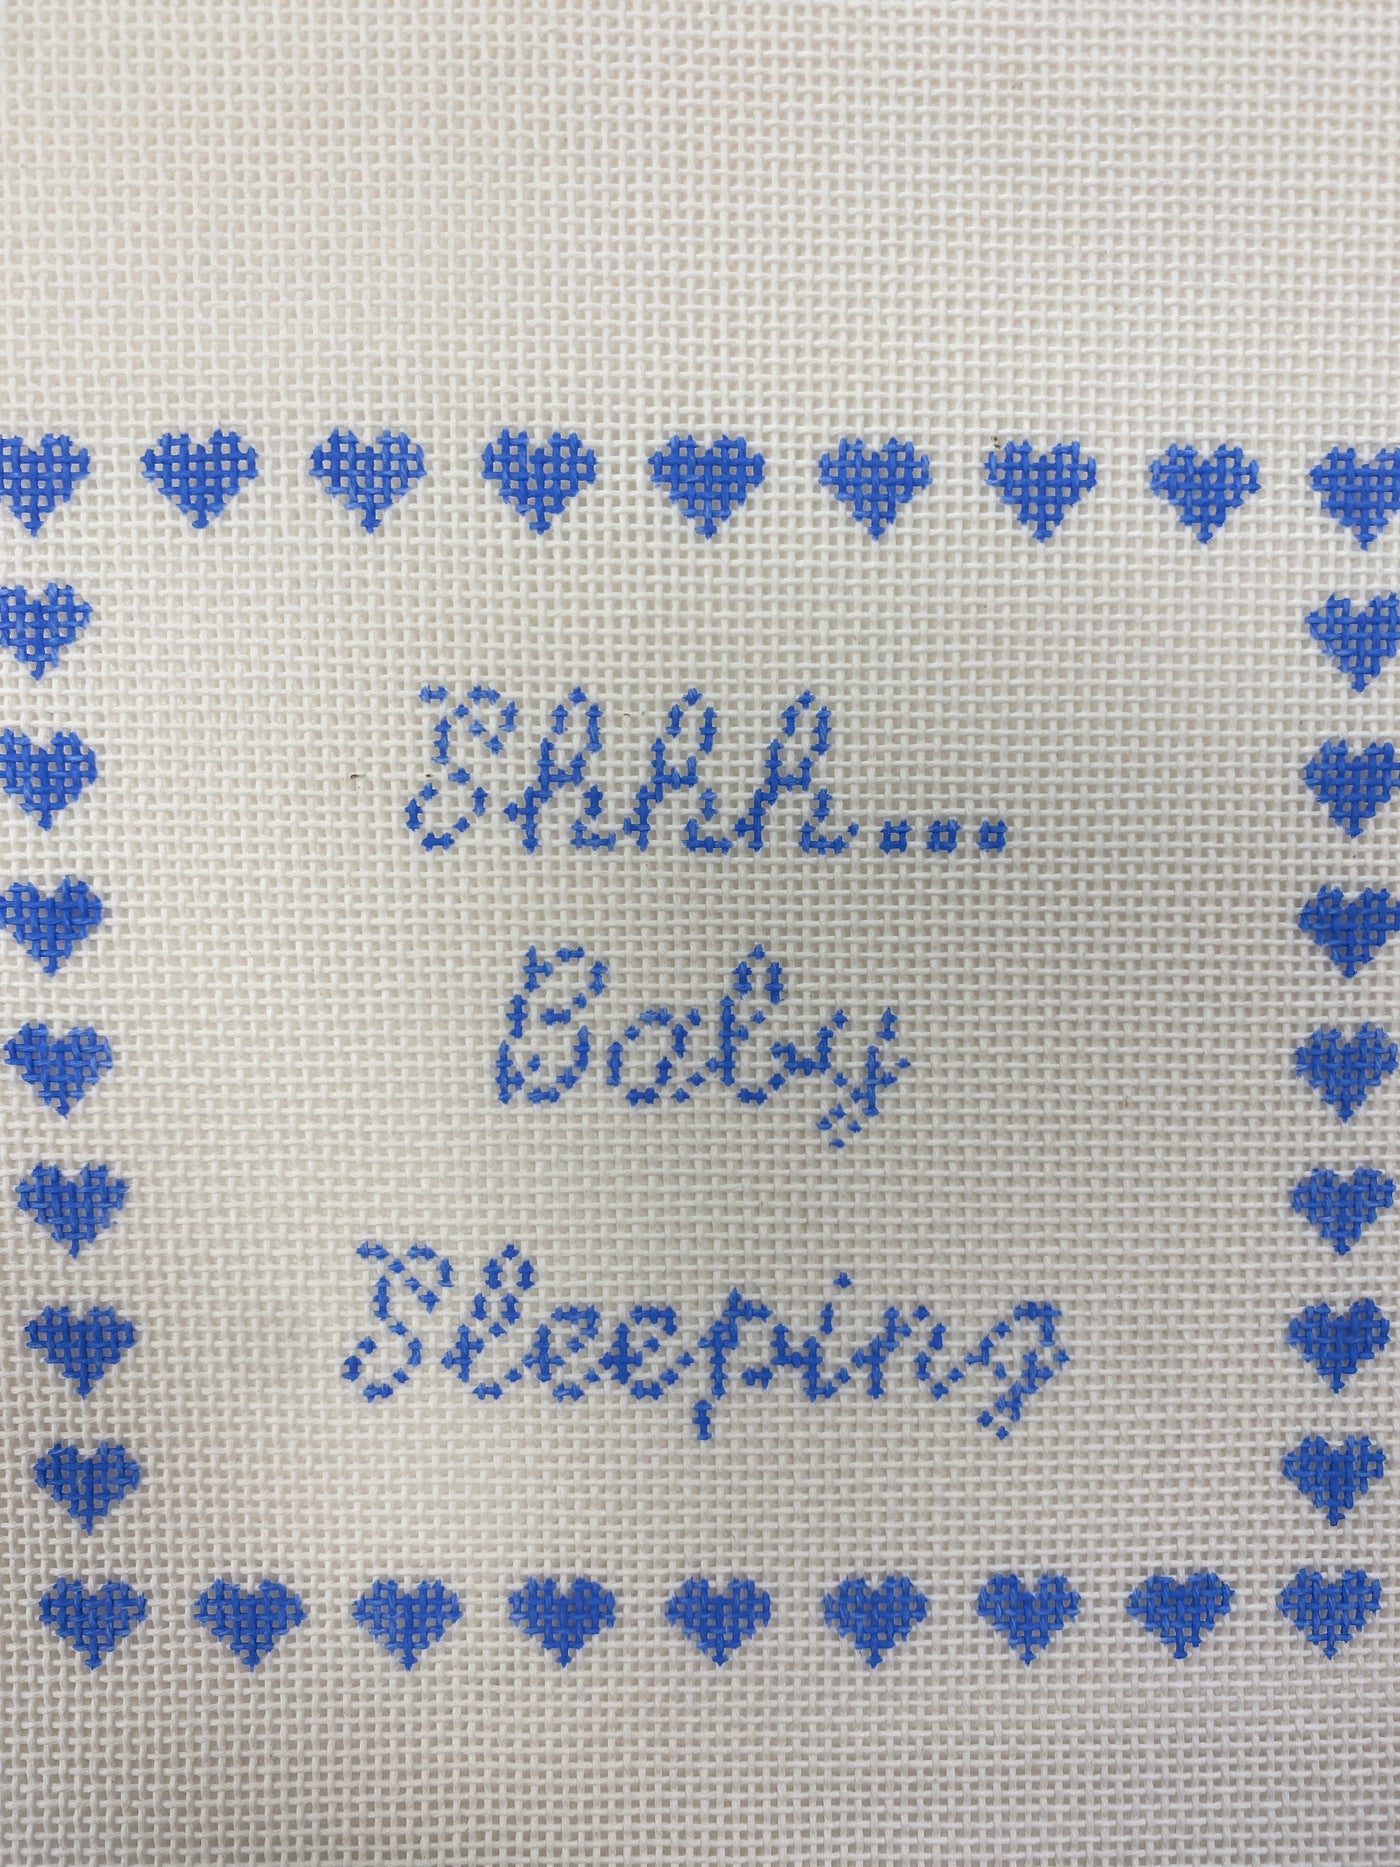 Shhh Baby Sleeping Blue Silver Stitch Handpainted Needlepoint Canvas Size: 5.5" x 5.5" / 18 Mesh